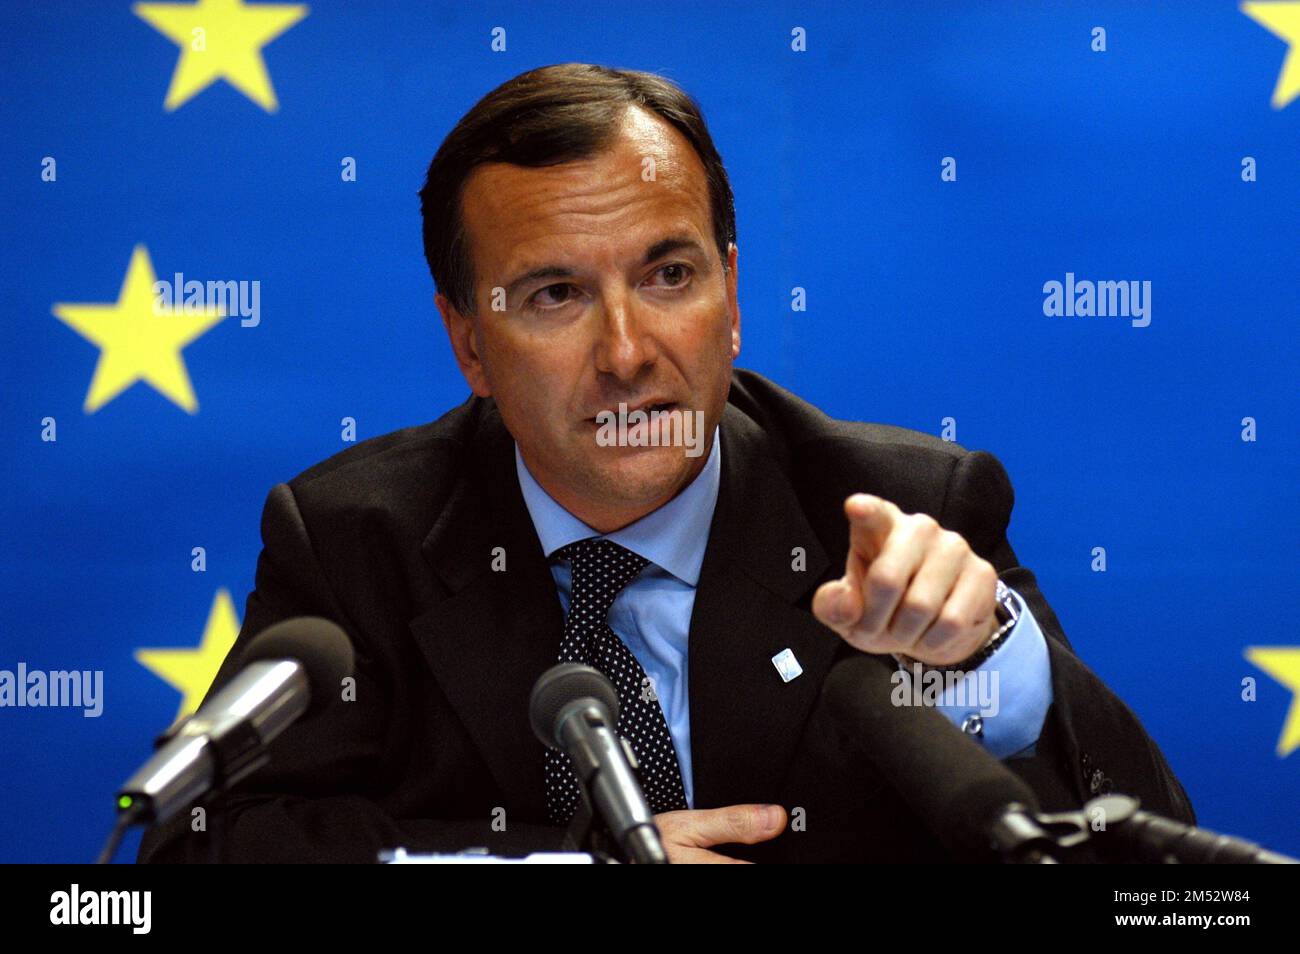 Photo Repertoire, Italy. 25th Dec, 2022. EUROPEAN COUNCIL FOR THE CONSTITUTION BRUSSELS IN THE PHOTO FRANCO FRATTINI (BRUXELLES - 2004-03-25, Mauro Bottaro) ps the photo can be used in respect of the context in which it was taken, and without defamatory intent of the decency of the people represented Editorial Usage Only Credit: Independent Photo Agency/Alamy Live News Stock Photo